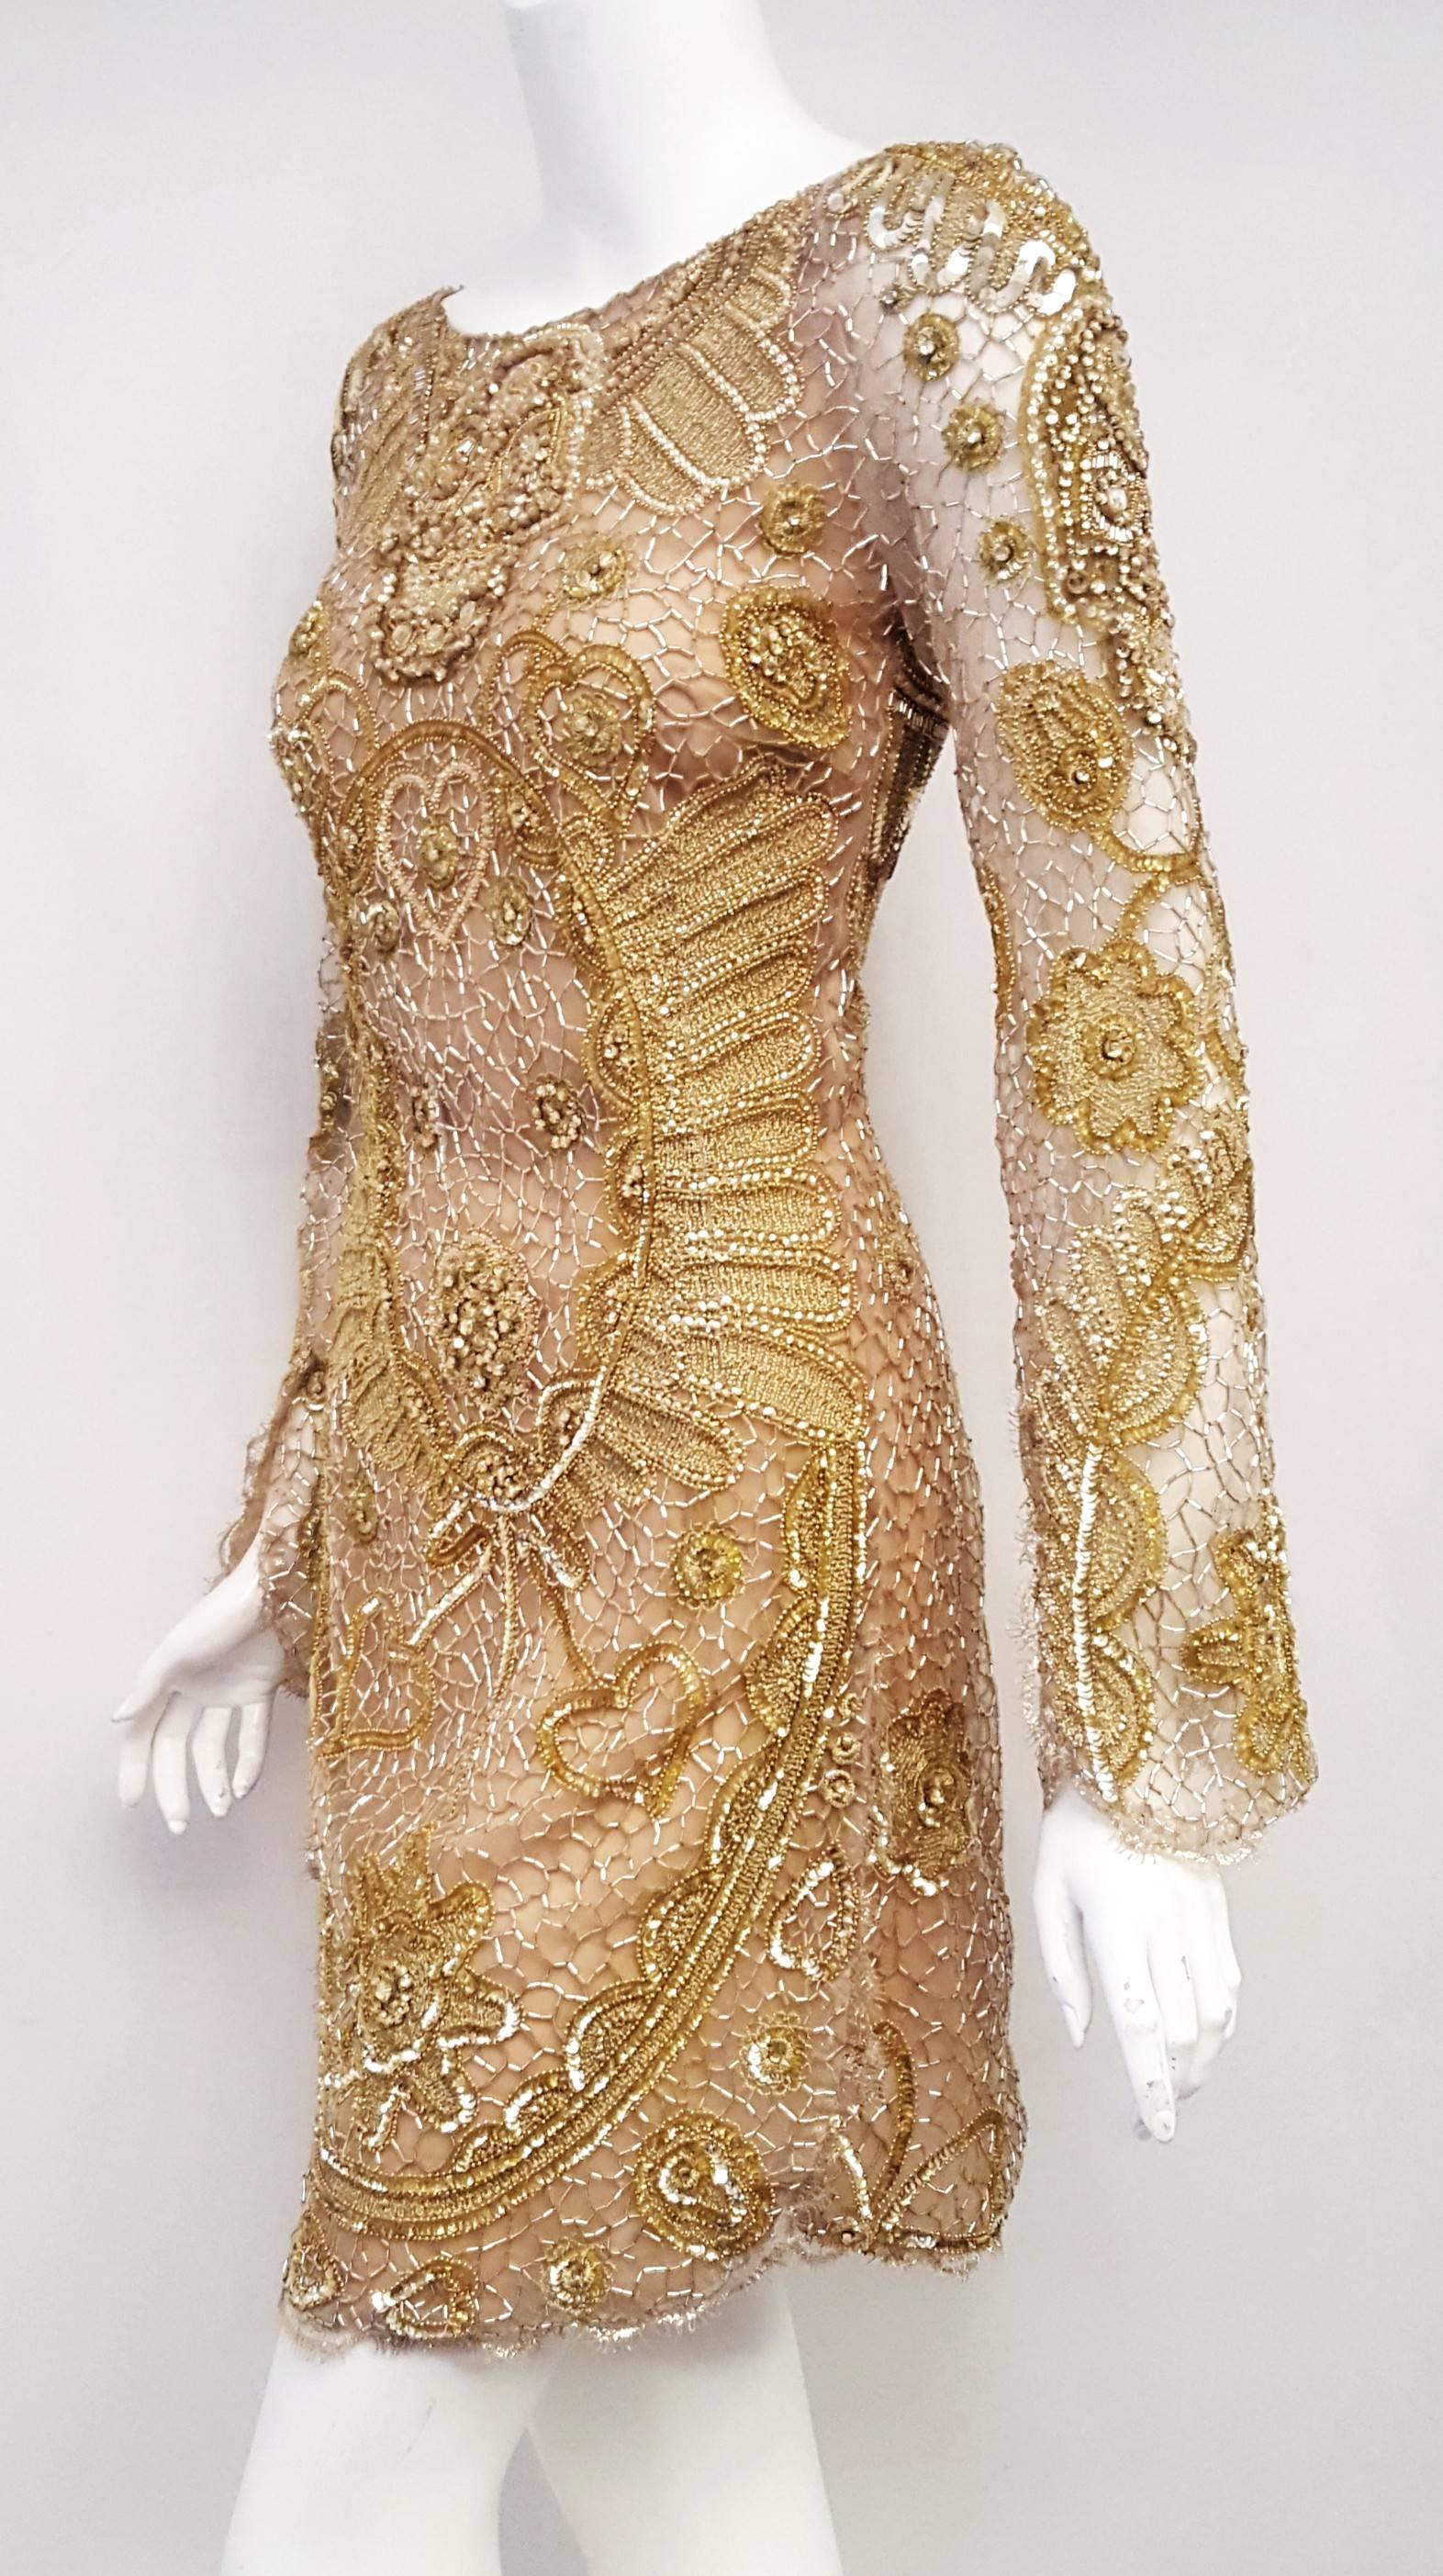 Emilio Pucci gold tone detailed beaded runway dress is a showstopper! This dress is from the 2012 Spring collection and one of Peter Dundas best design of the year!  Starting at the round neckline and on the chest is a brilliant skull is designed